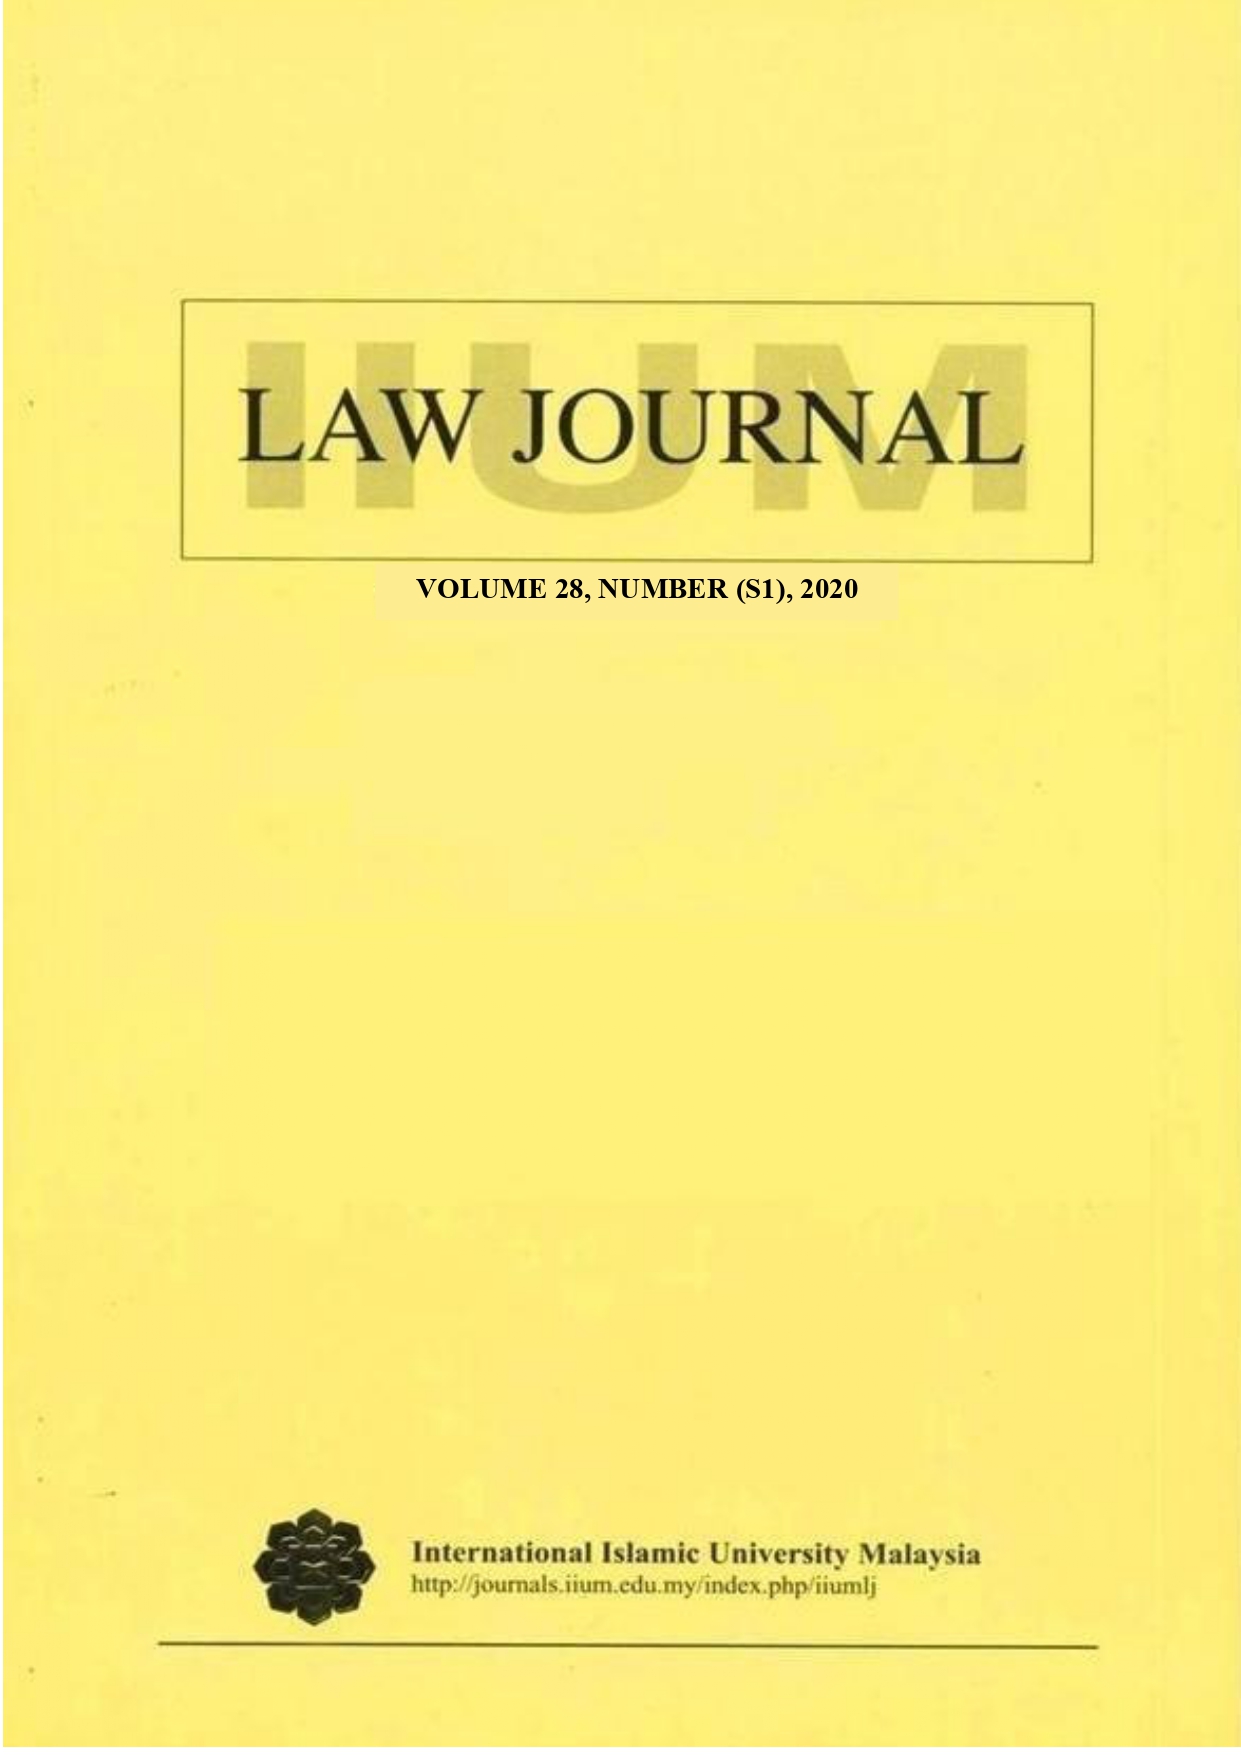 					View Vol. 28 No. (S1) (2020): Special Issue: Law in the Digitalization Era
				